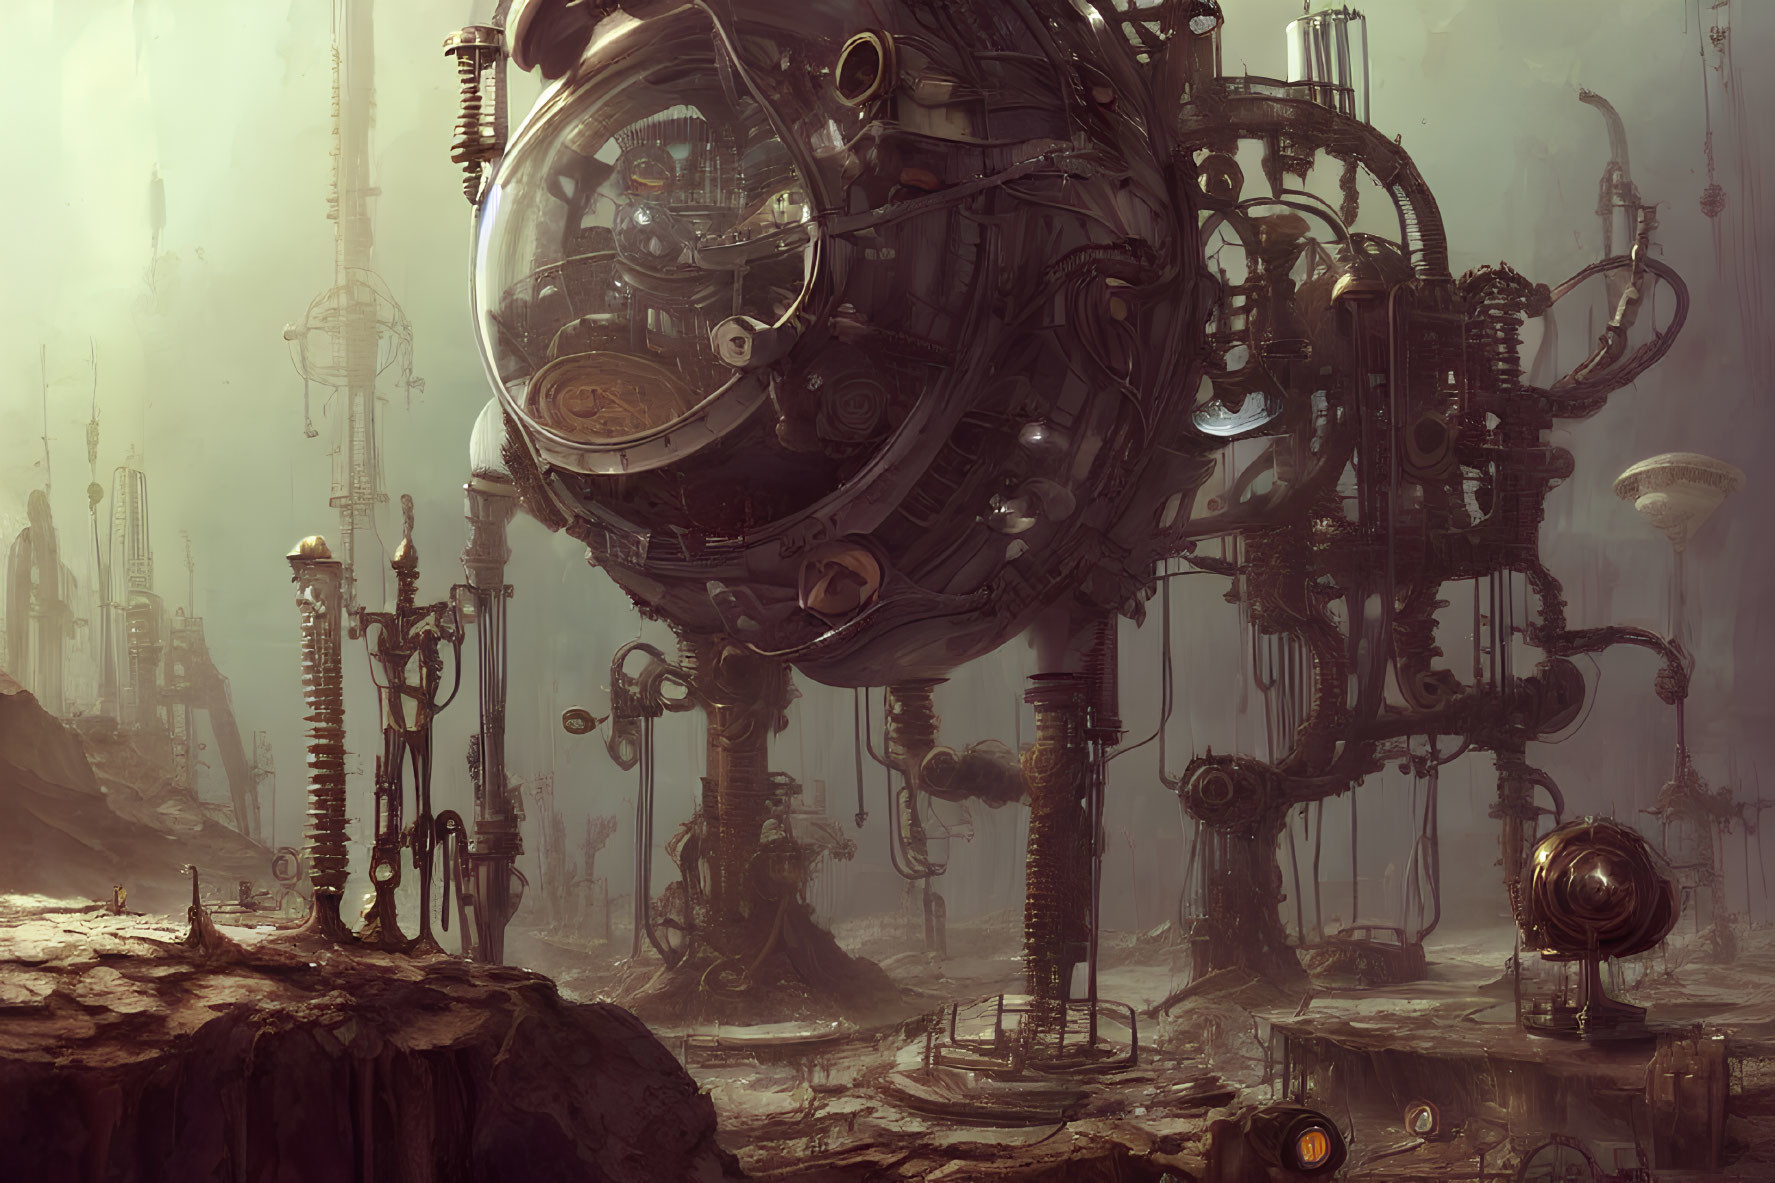 Steampunk landscape with towering structures and intricate machinery